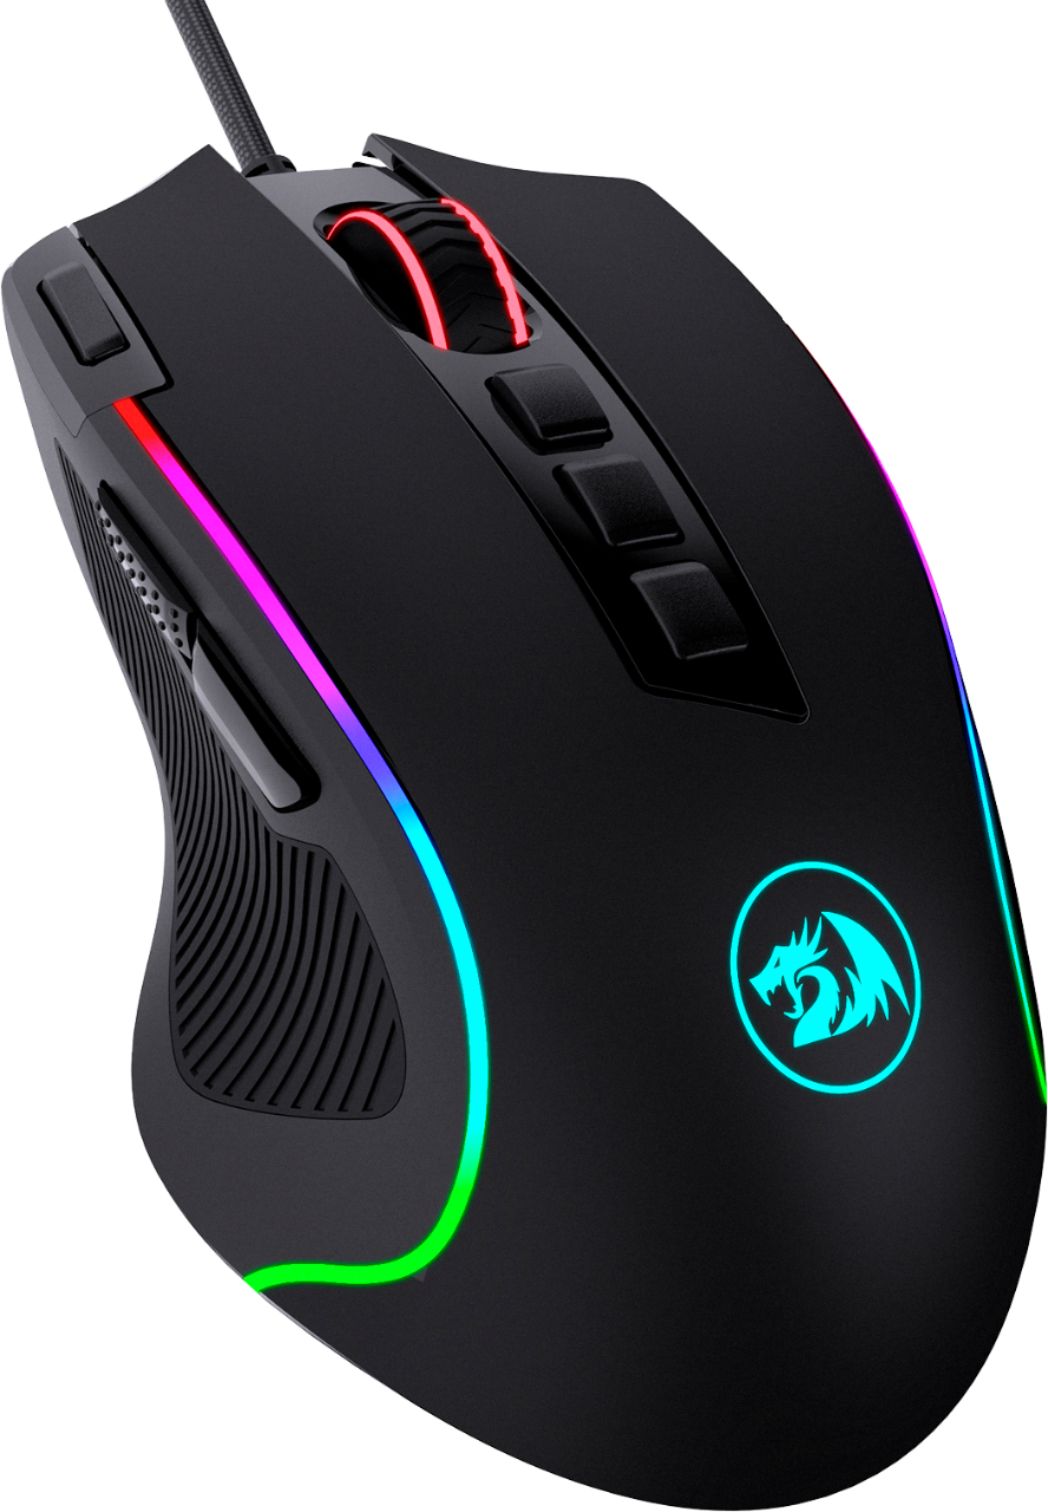 Angle View: REDRAGON - Predator M612 Wired Optical Gaming Mouse with RGB Backlighting - Black